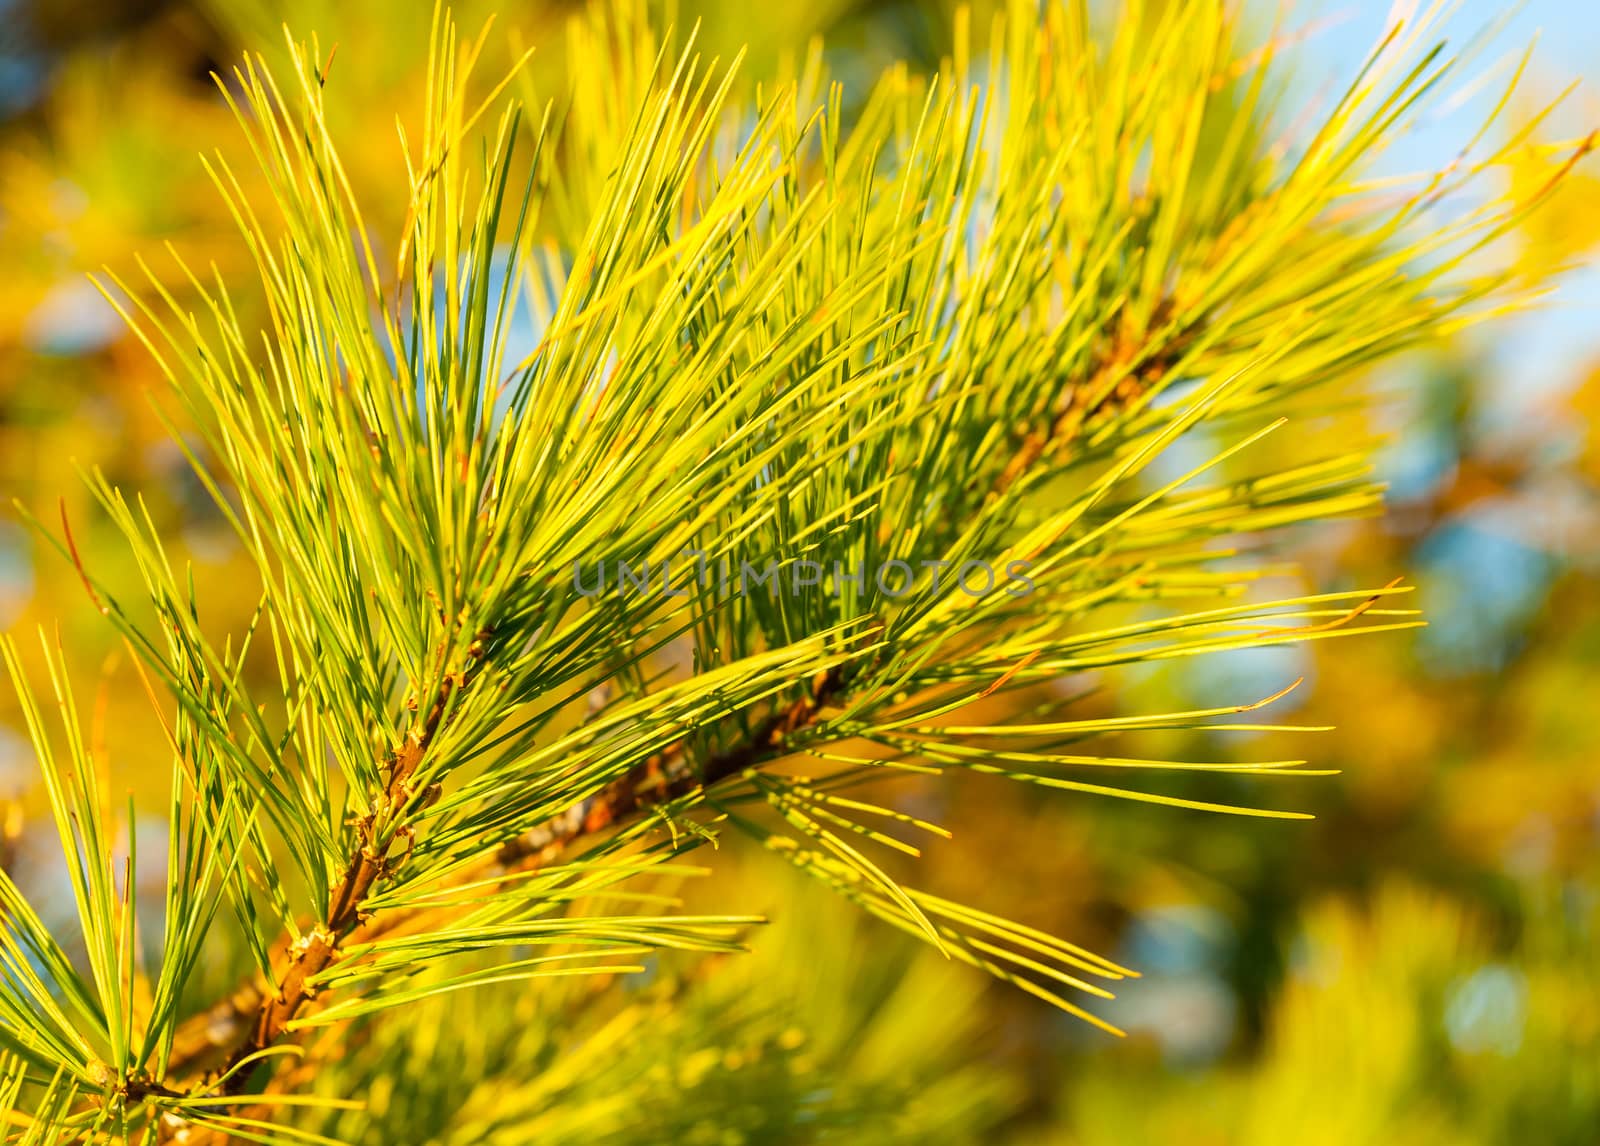 Pine tree branch and needles closeup bright green designer background by brians101